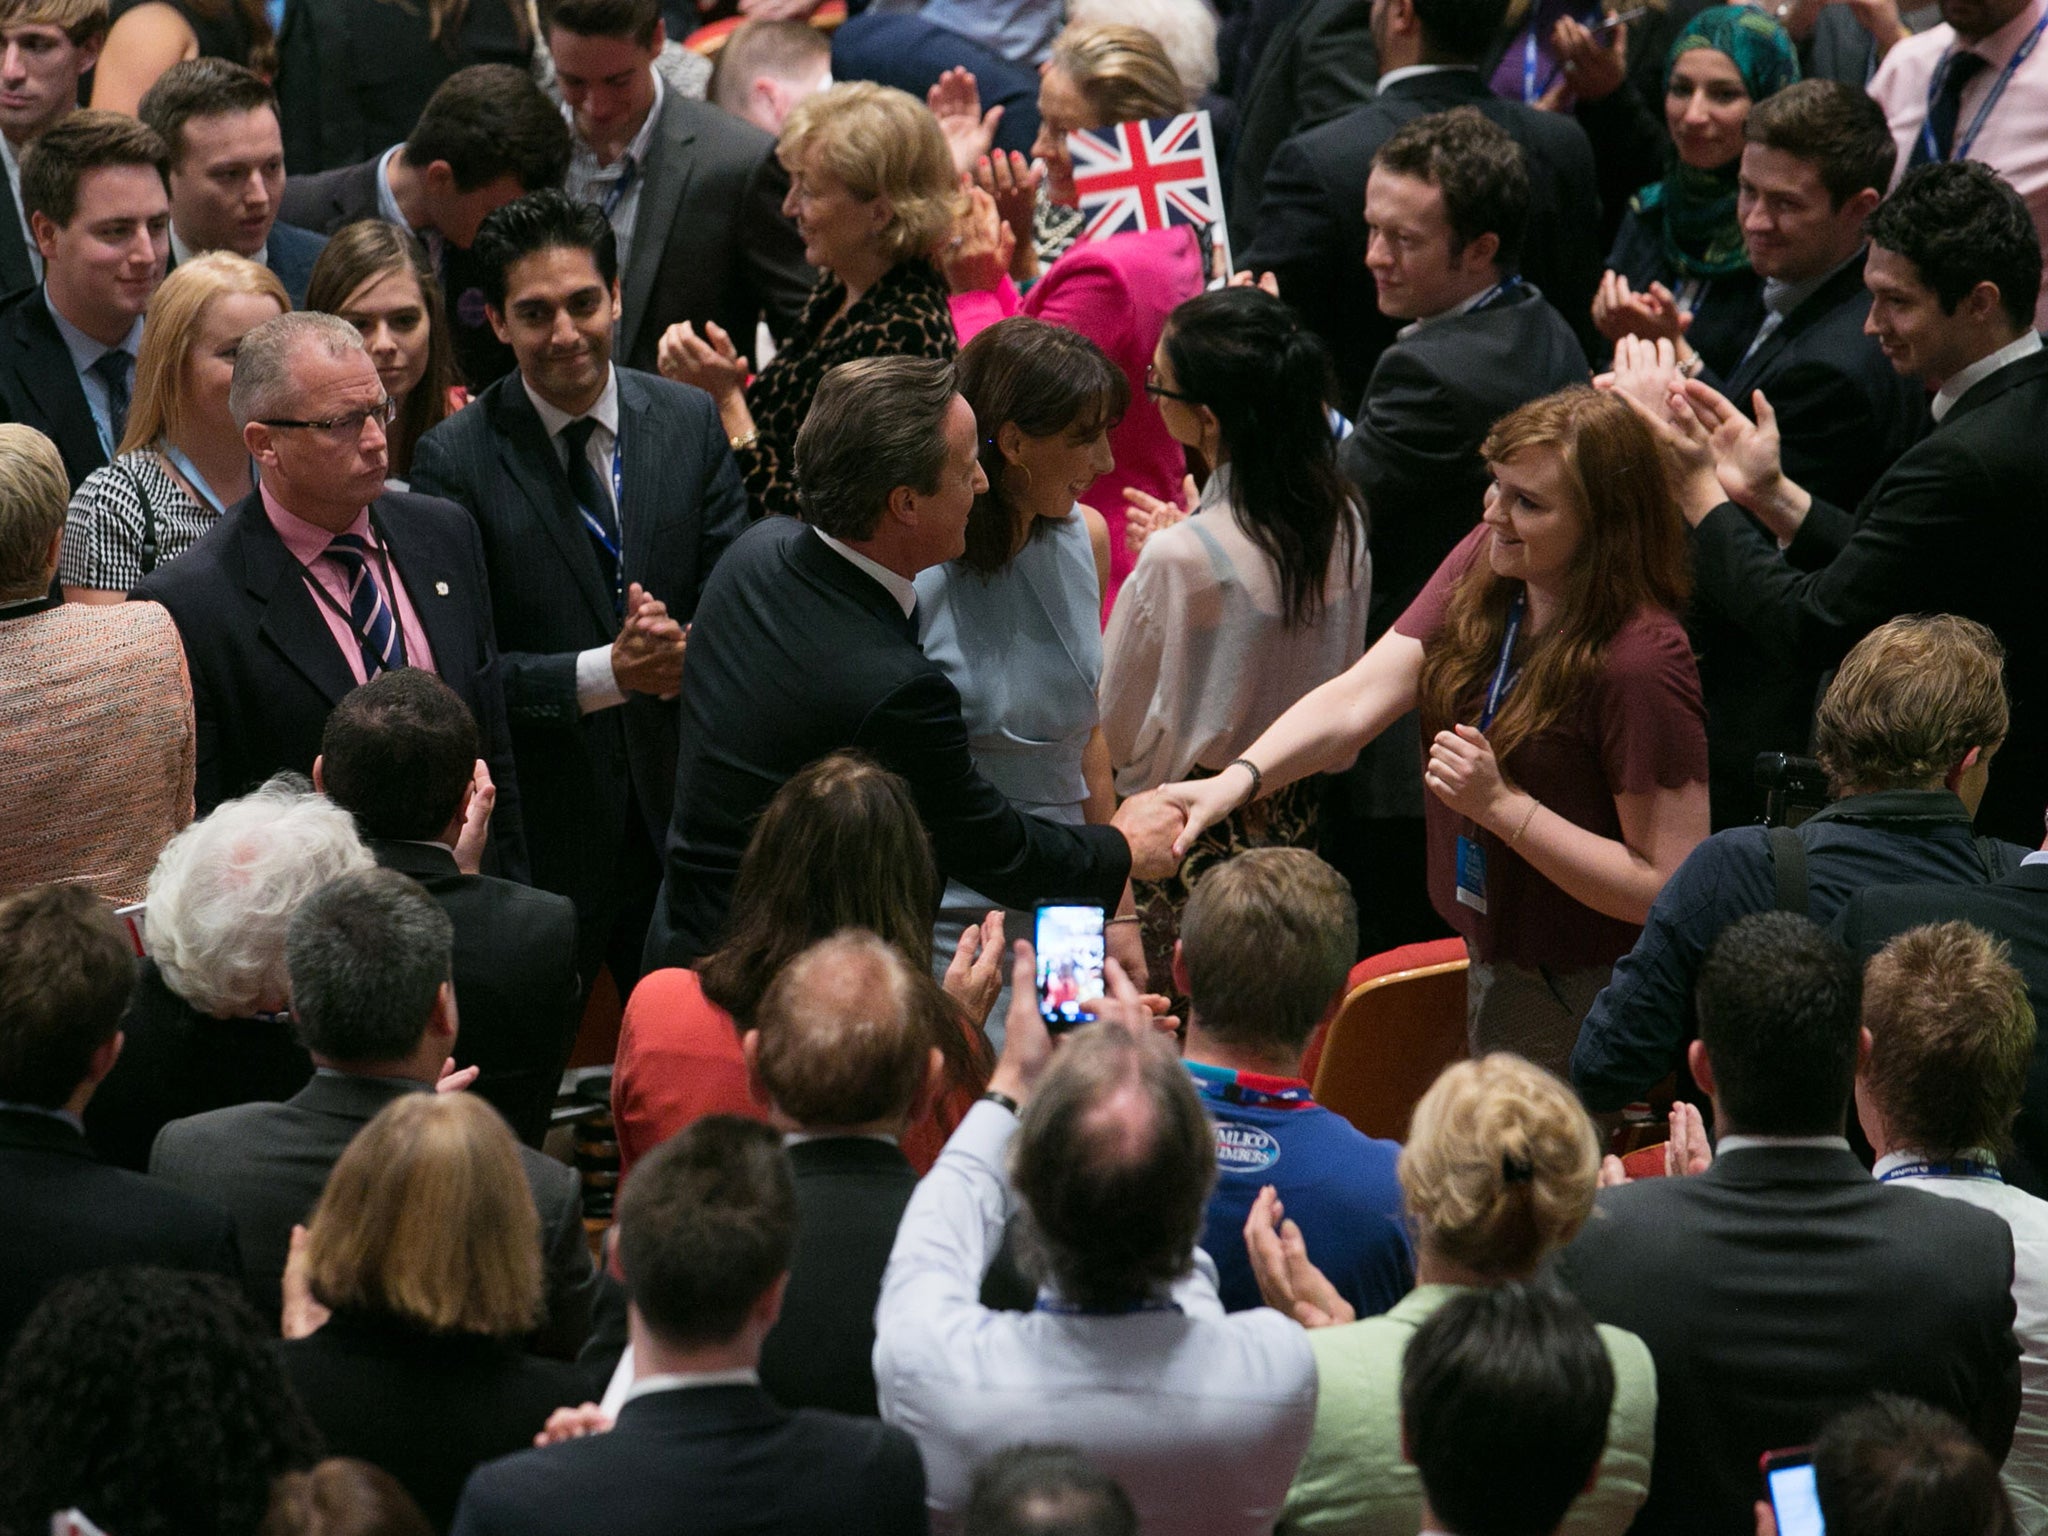 David Cameron greets supporters following his speech at 2014 Conservative Party Conference on Birmingham